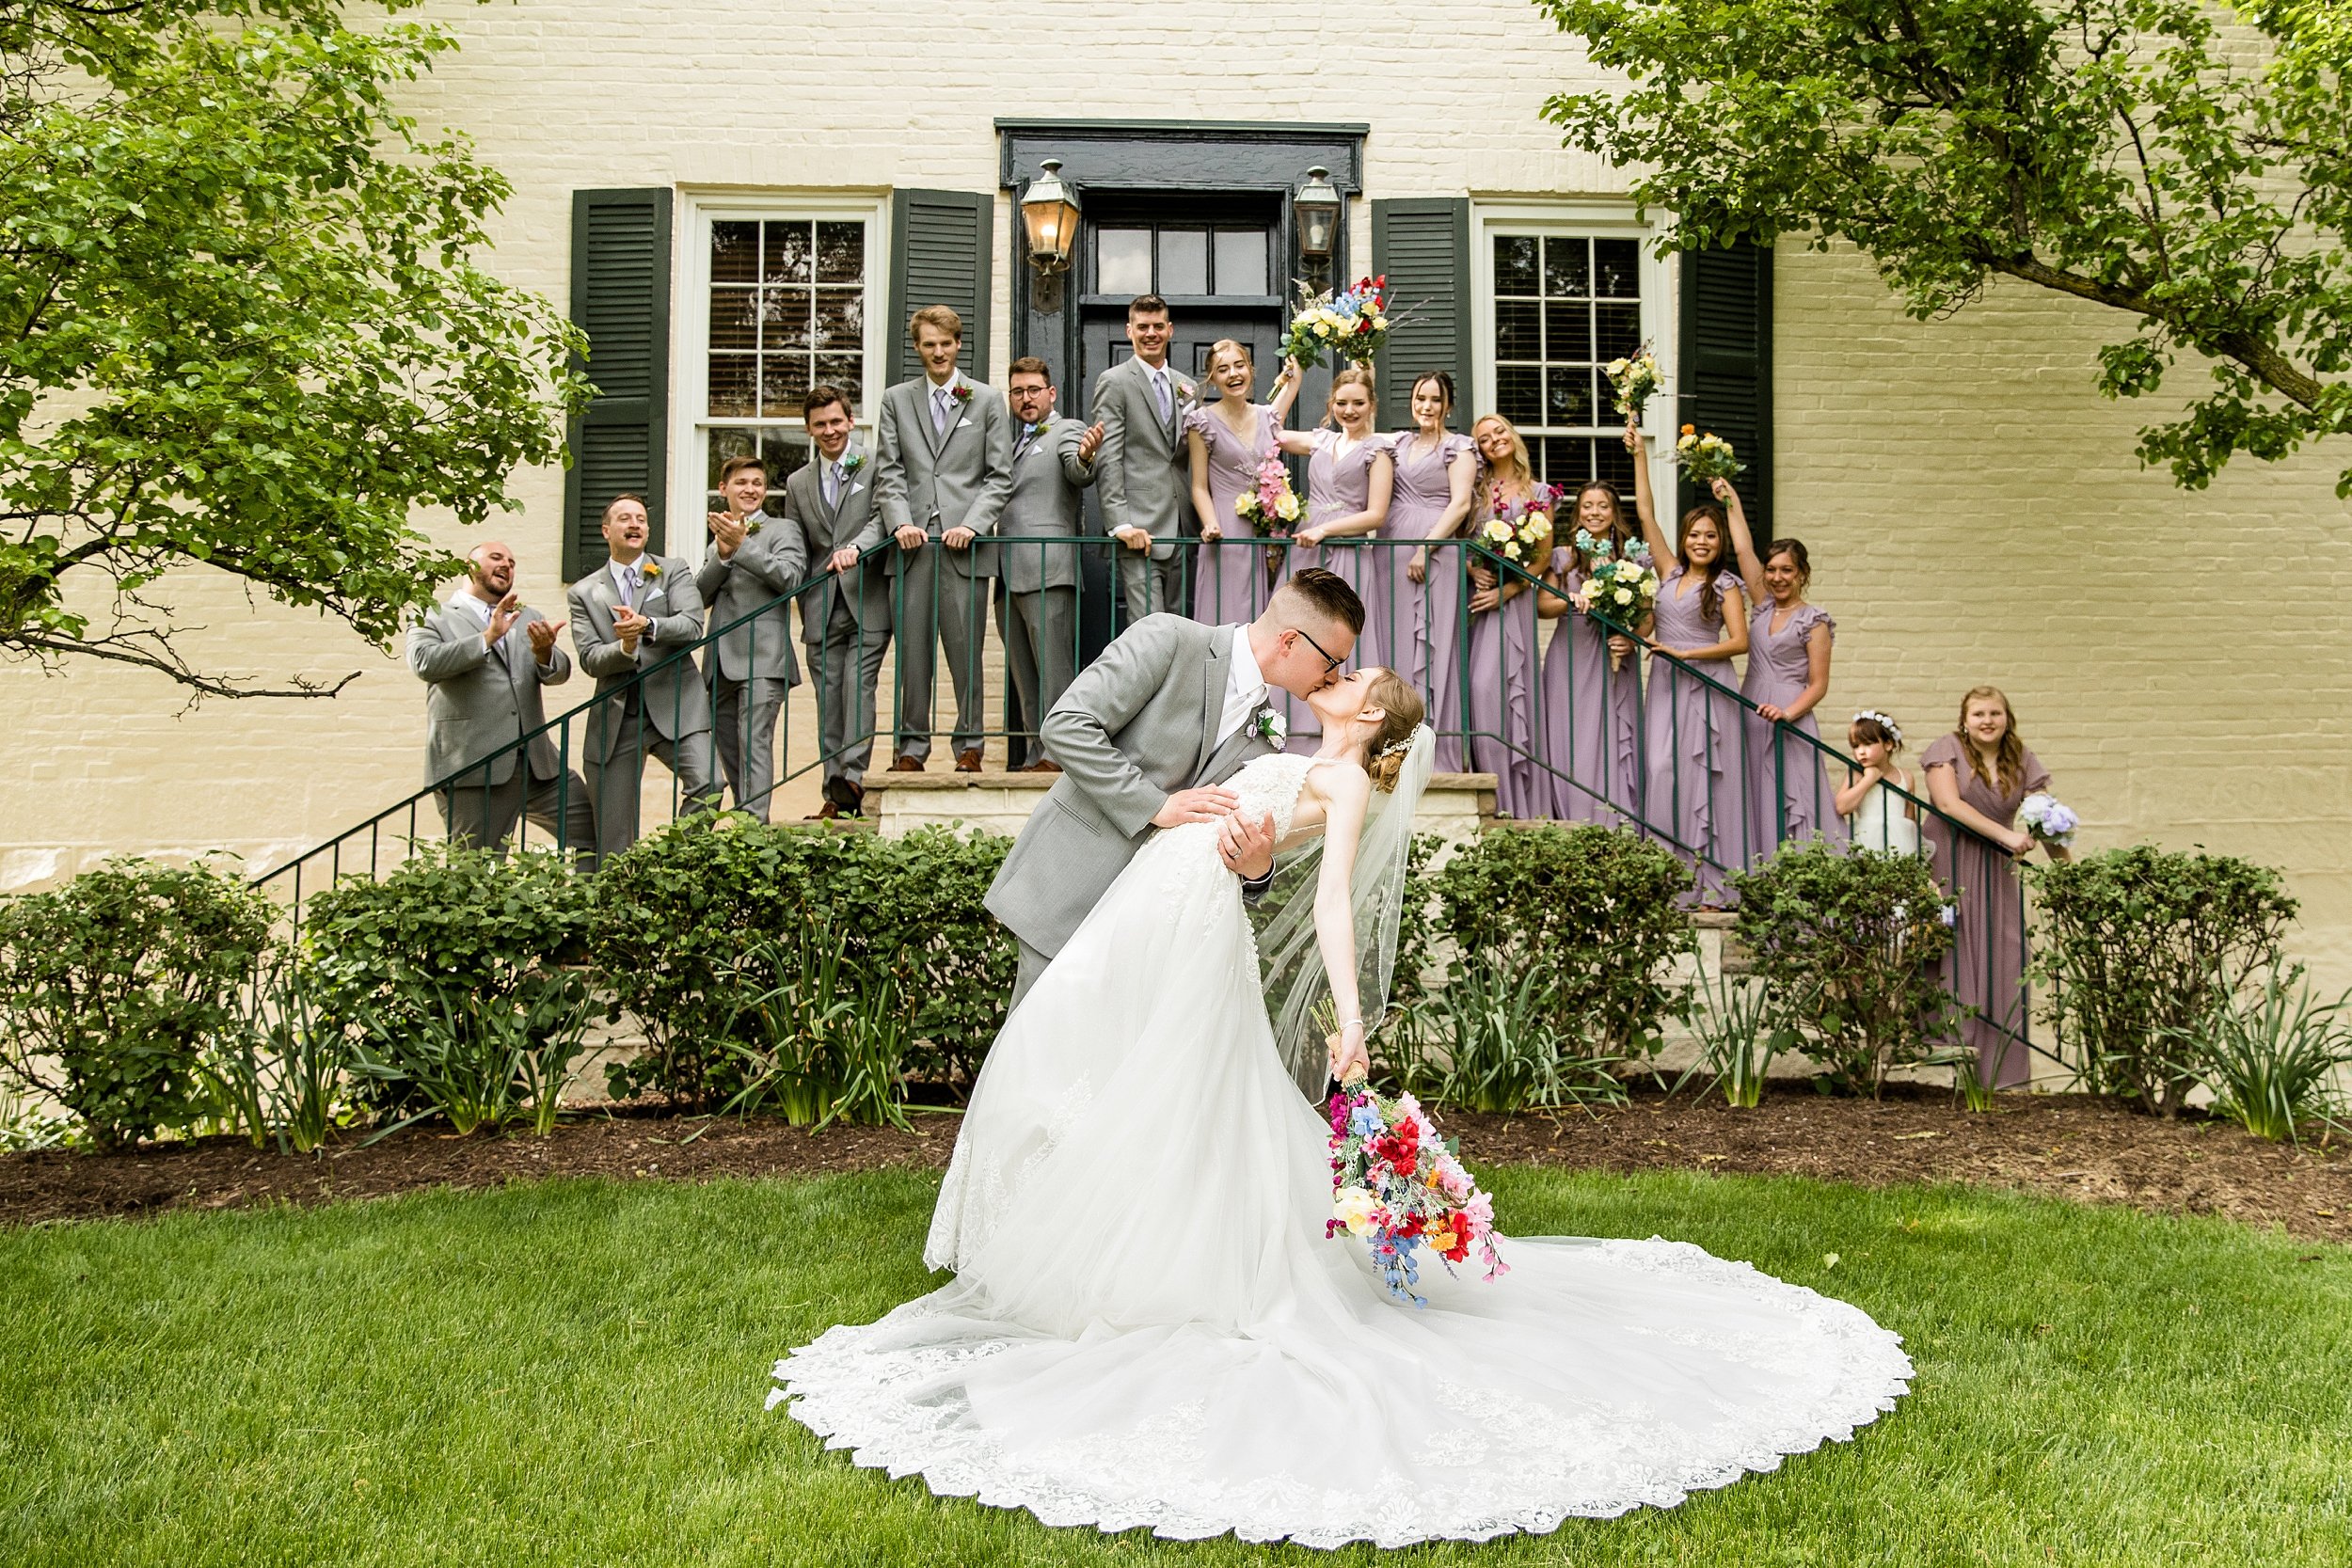  Possibly one of my favorite bridal party photos of the whole year! 